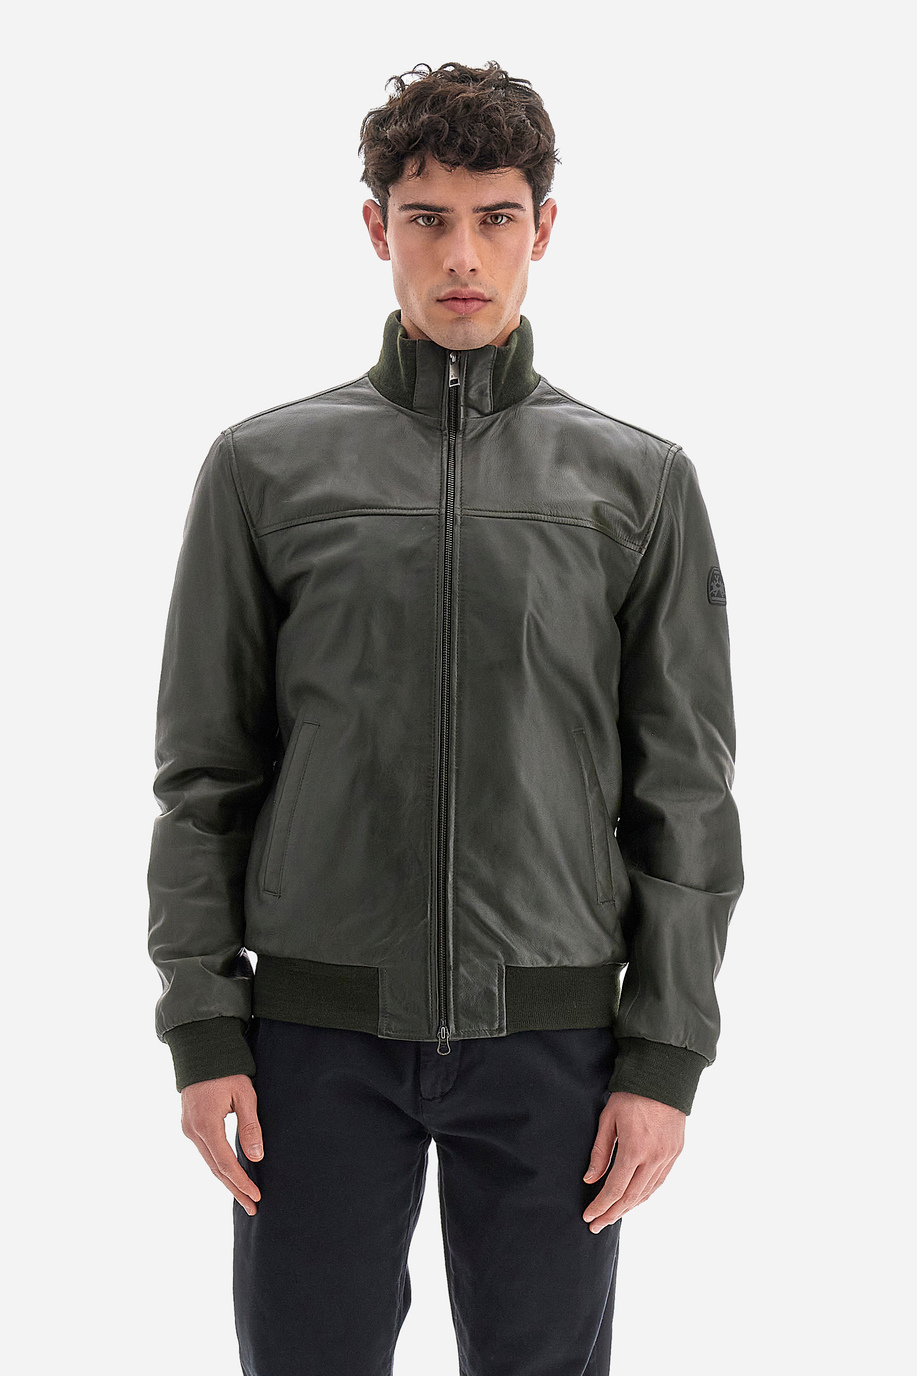 Man regular fit jacket - Wentworth - Outerwear and Jackets | La Martina - Official Online Shop